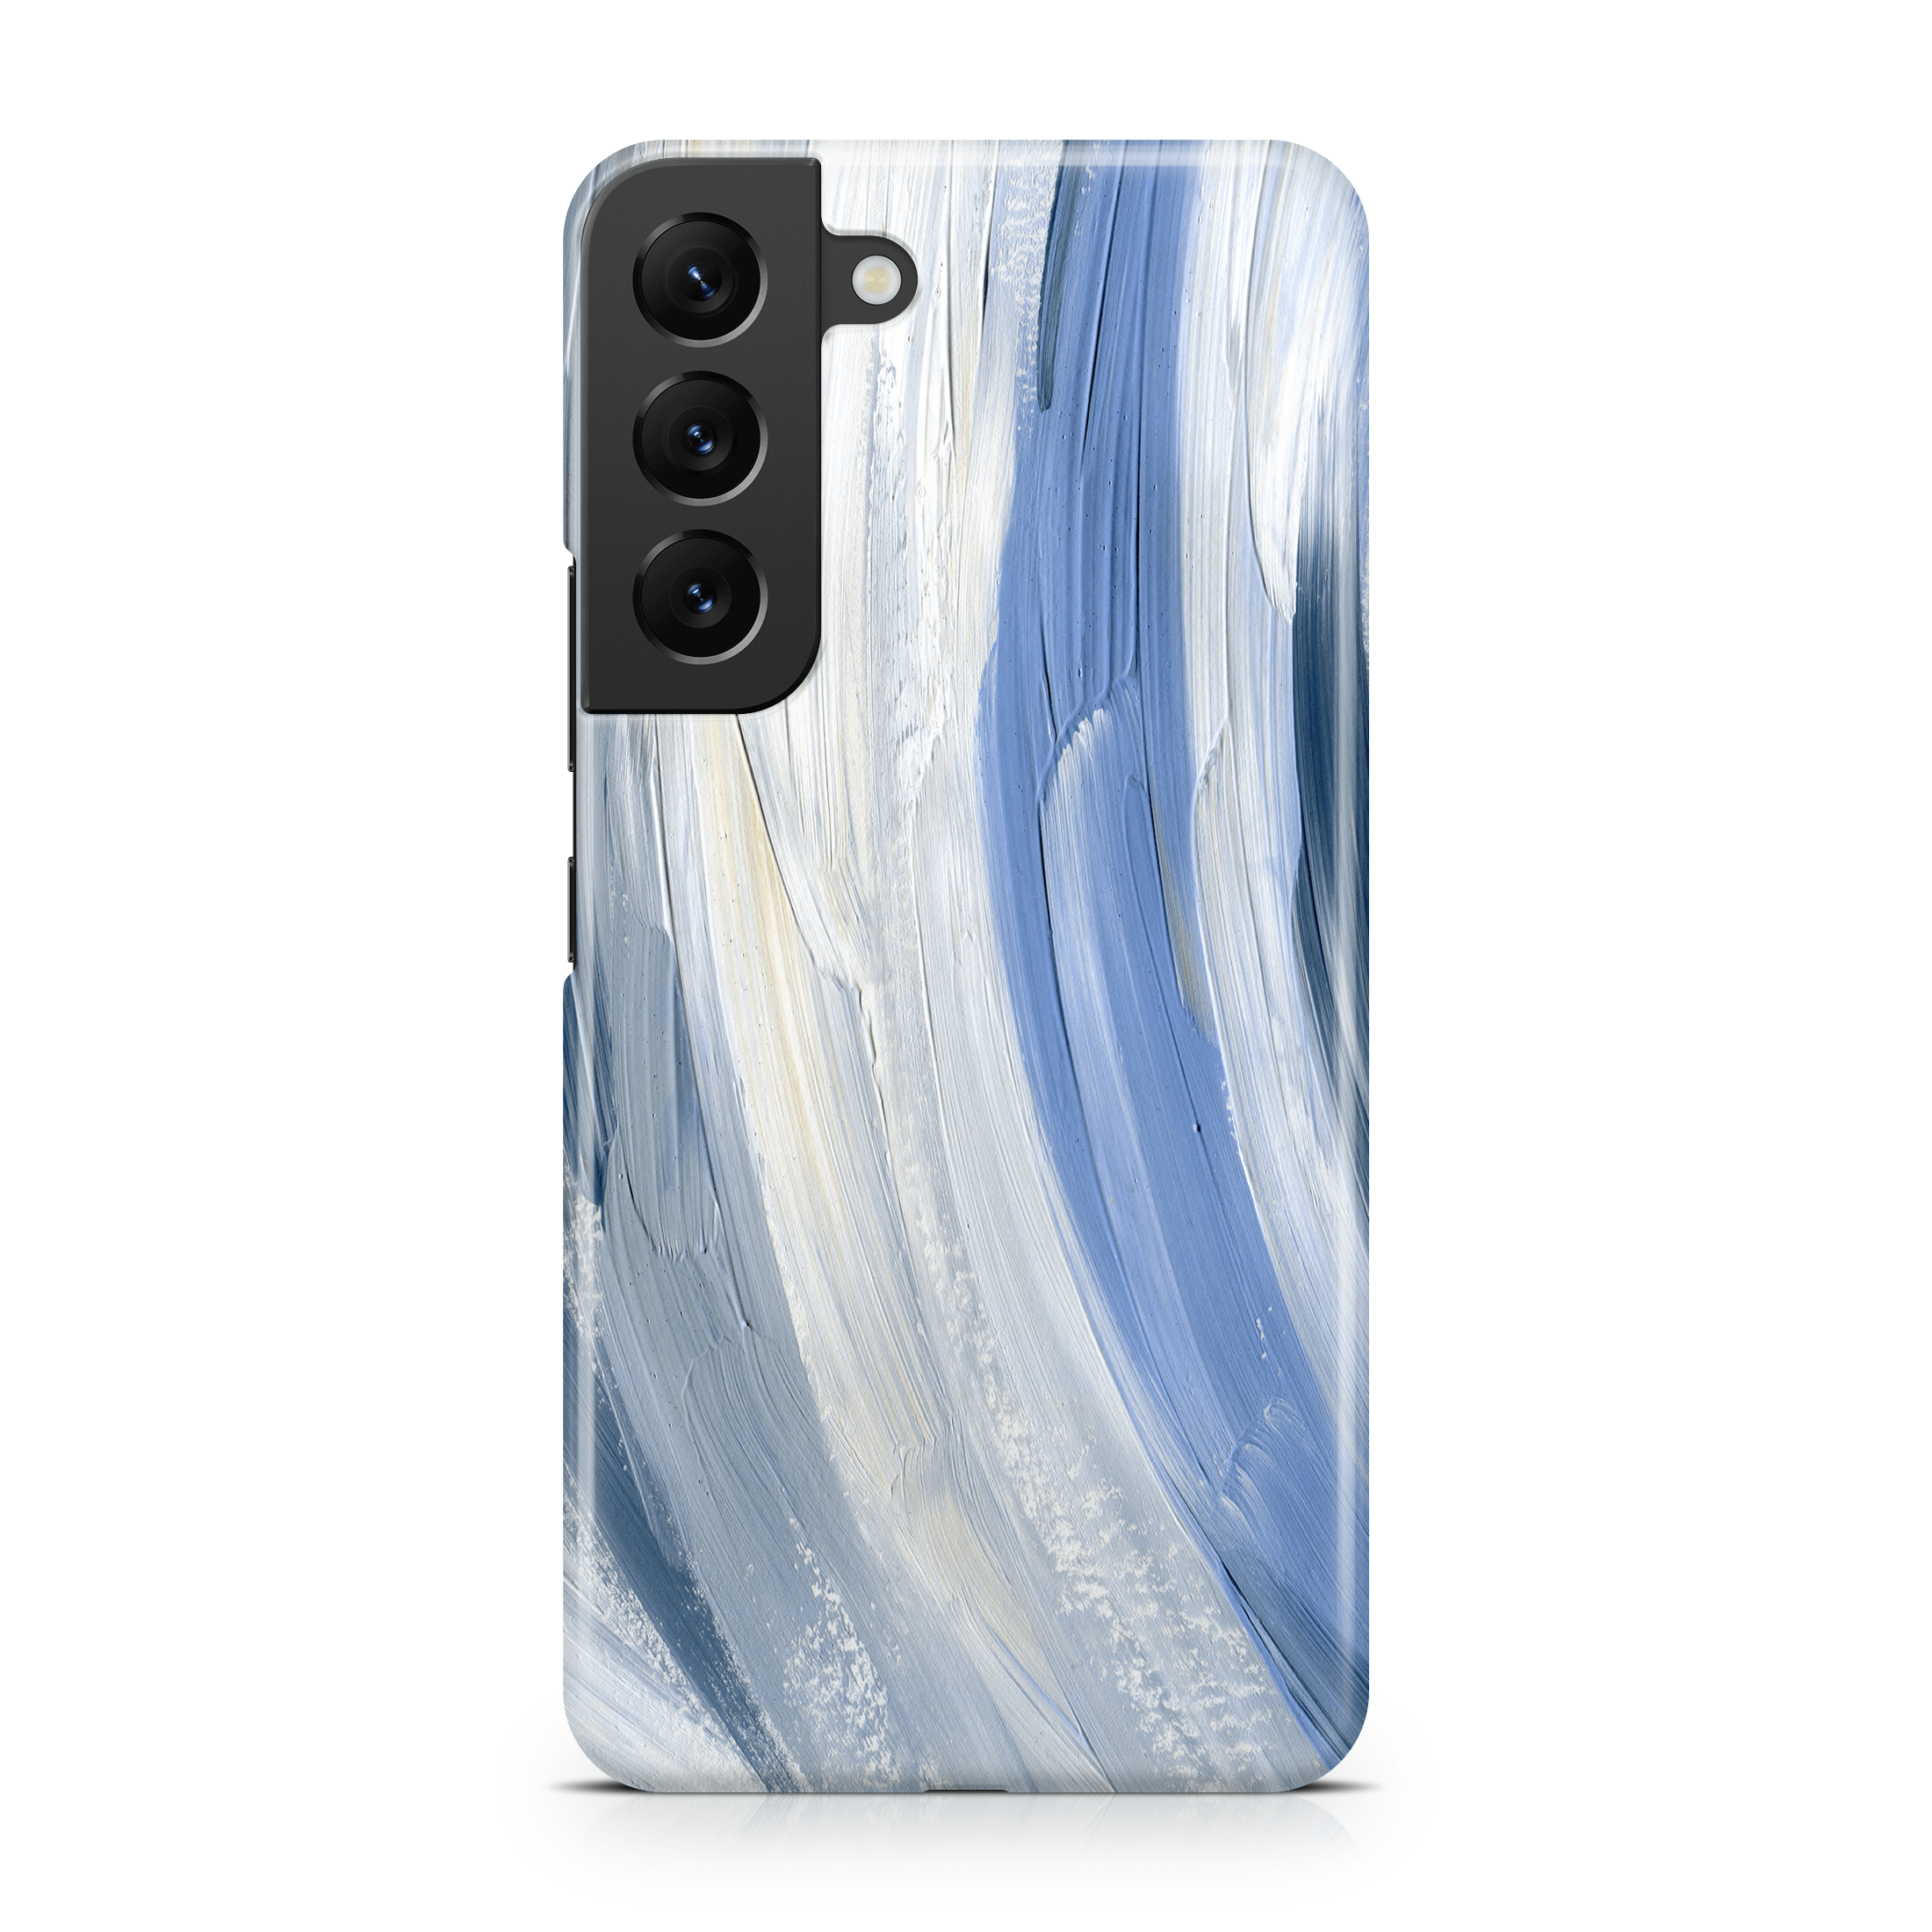 Blue Out - Samsung phone case designs by CaseSwagger